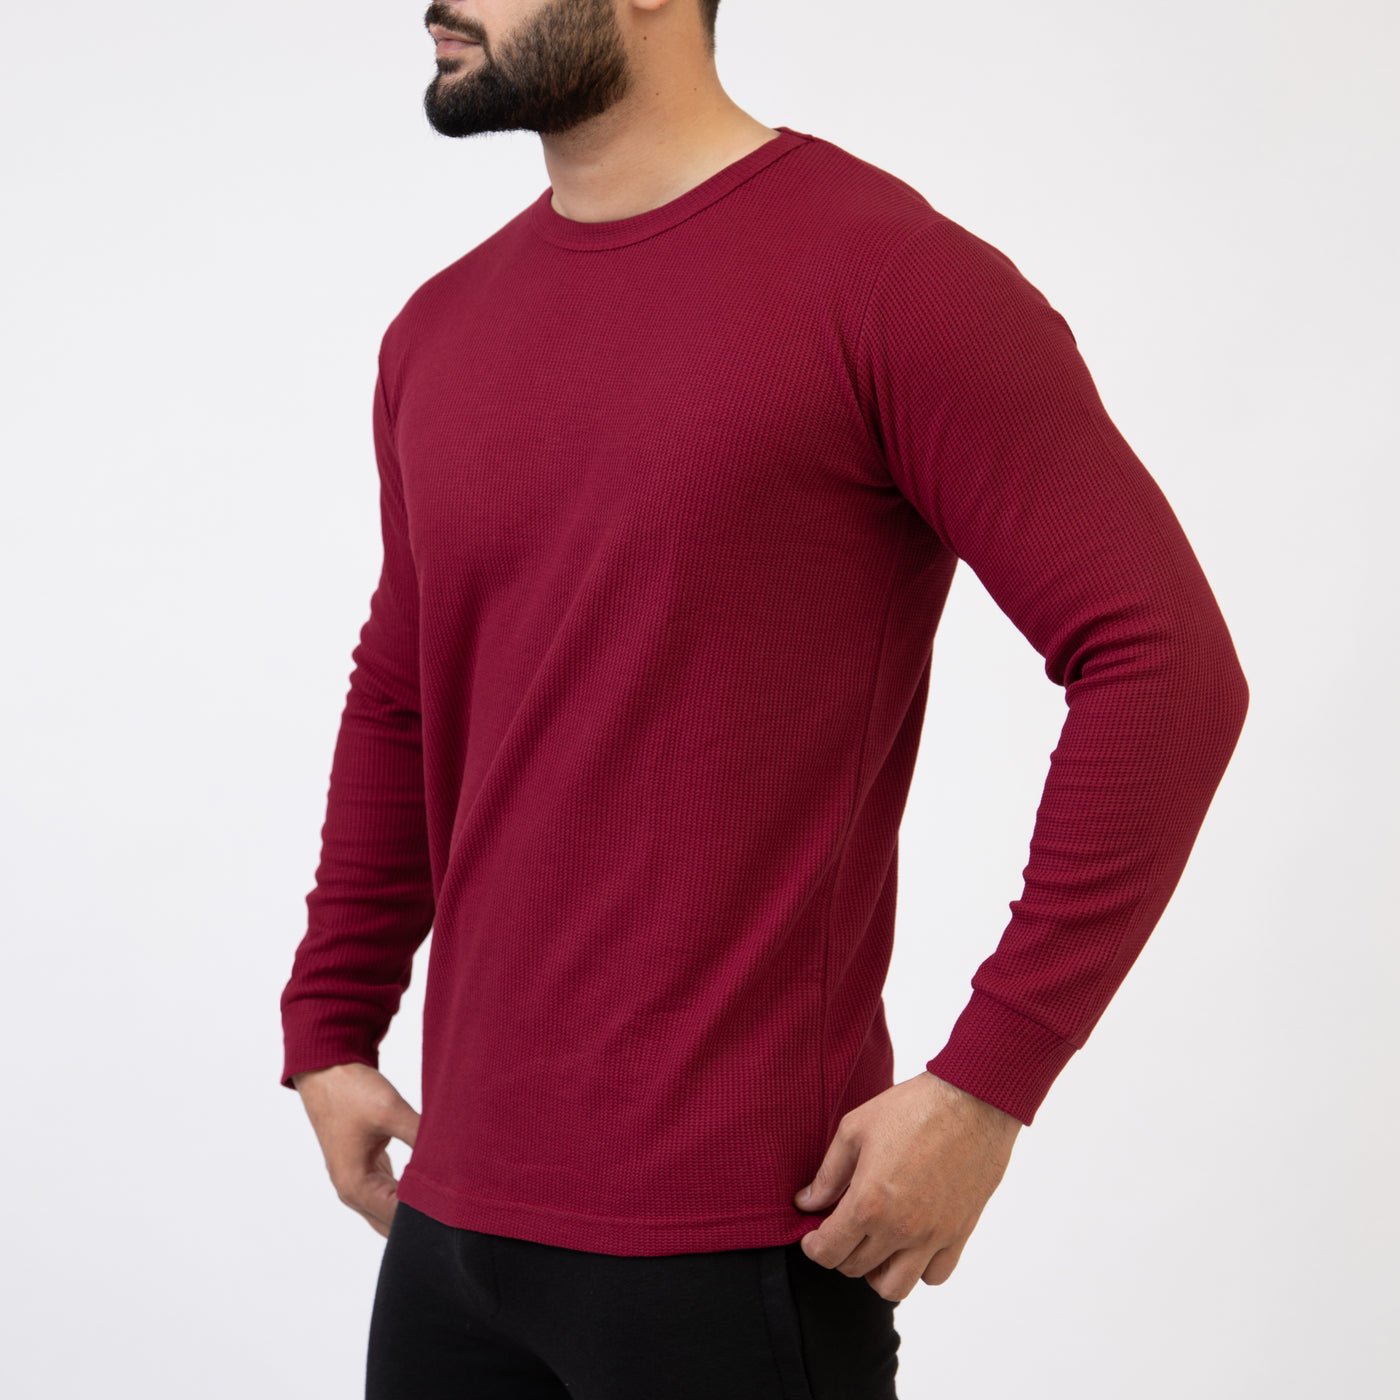 Burgundy Thermal Full Sleeves Waffle-Knit